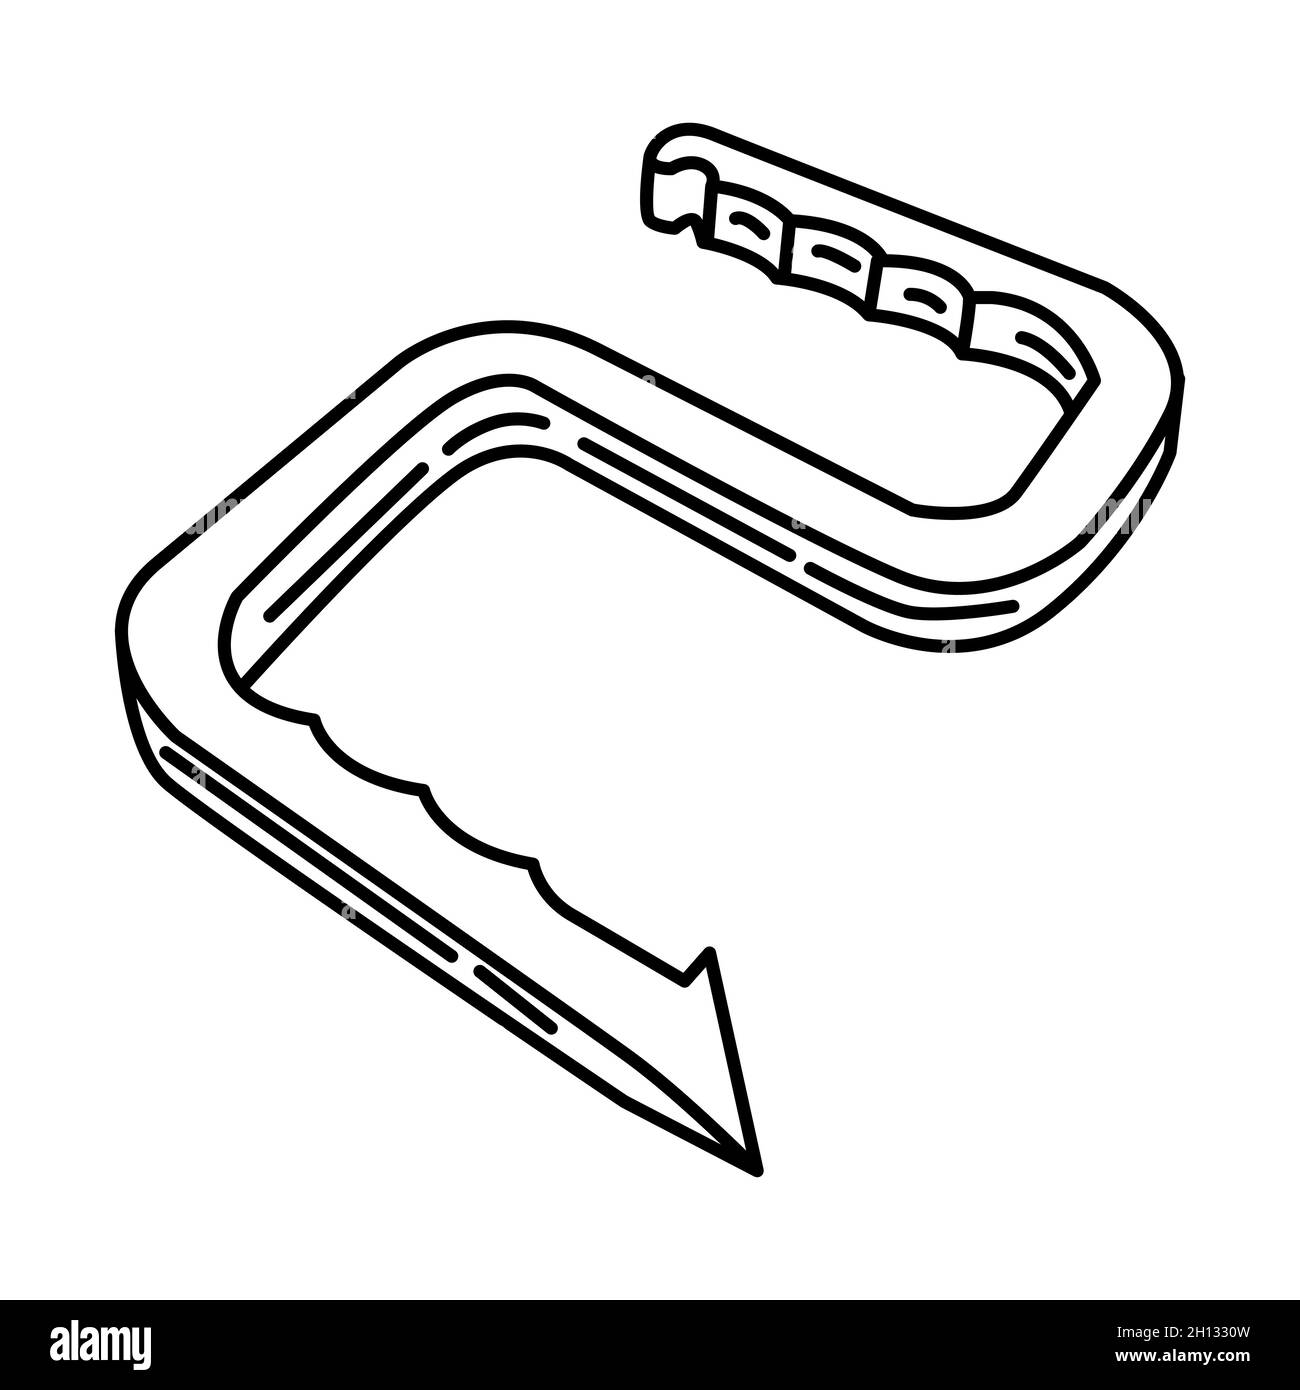 https://c8.alamy.com/comp/2H1330W/snagger-tool-part-of-firefighter-accessories-and-equipment-device-hand-drawn-icon-set-vector-2H1330W.jpg